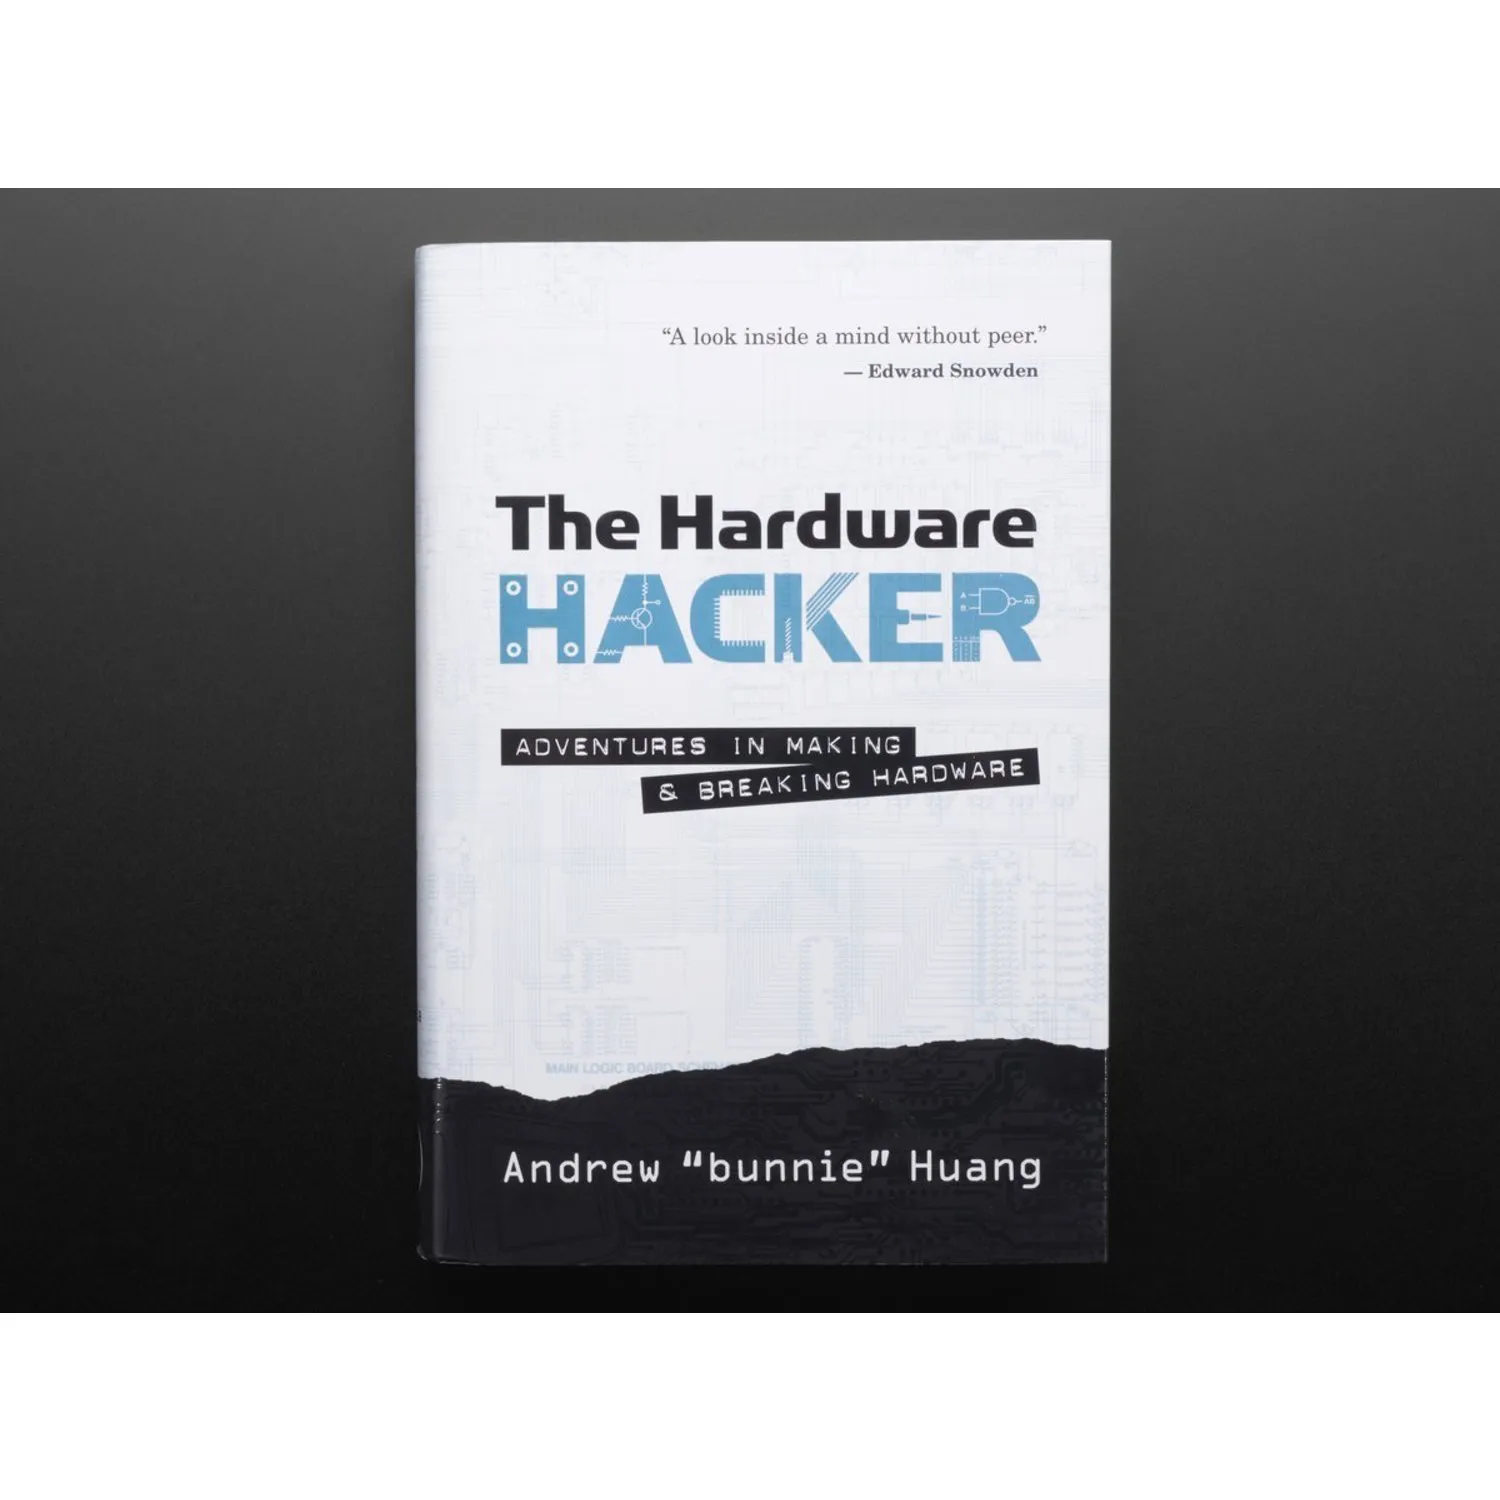 Photo of The Hardware Hacker: Adventures in Making and Breaking Hardware [by Bunnie Huang]